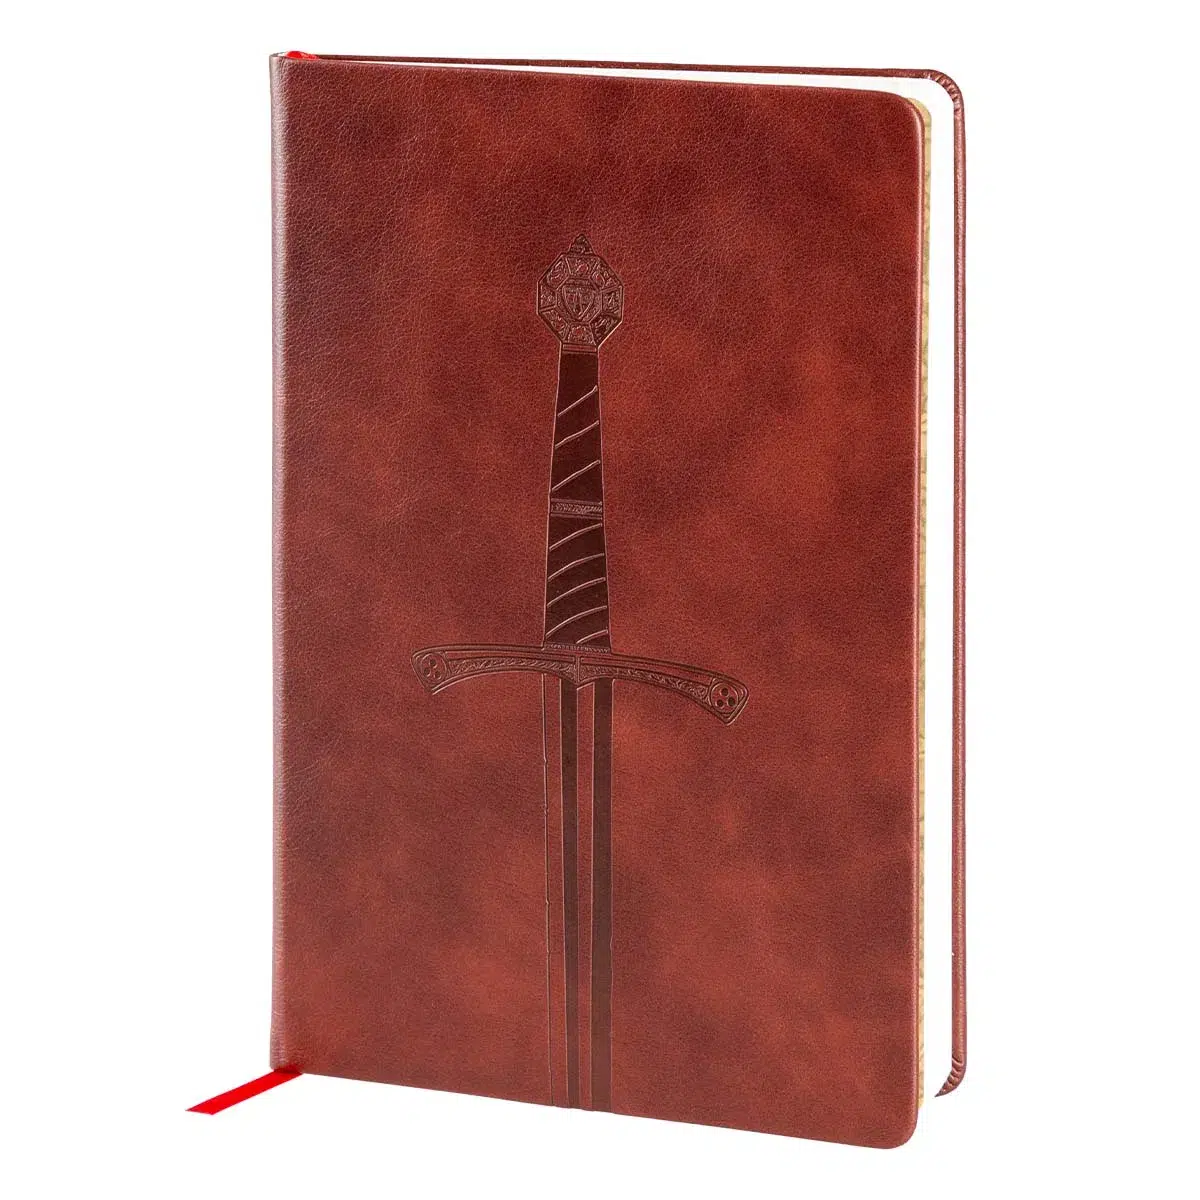 KCD Notebook "Sword" Cover